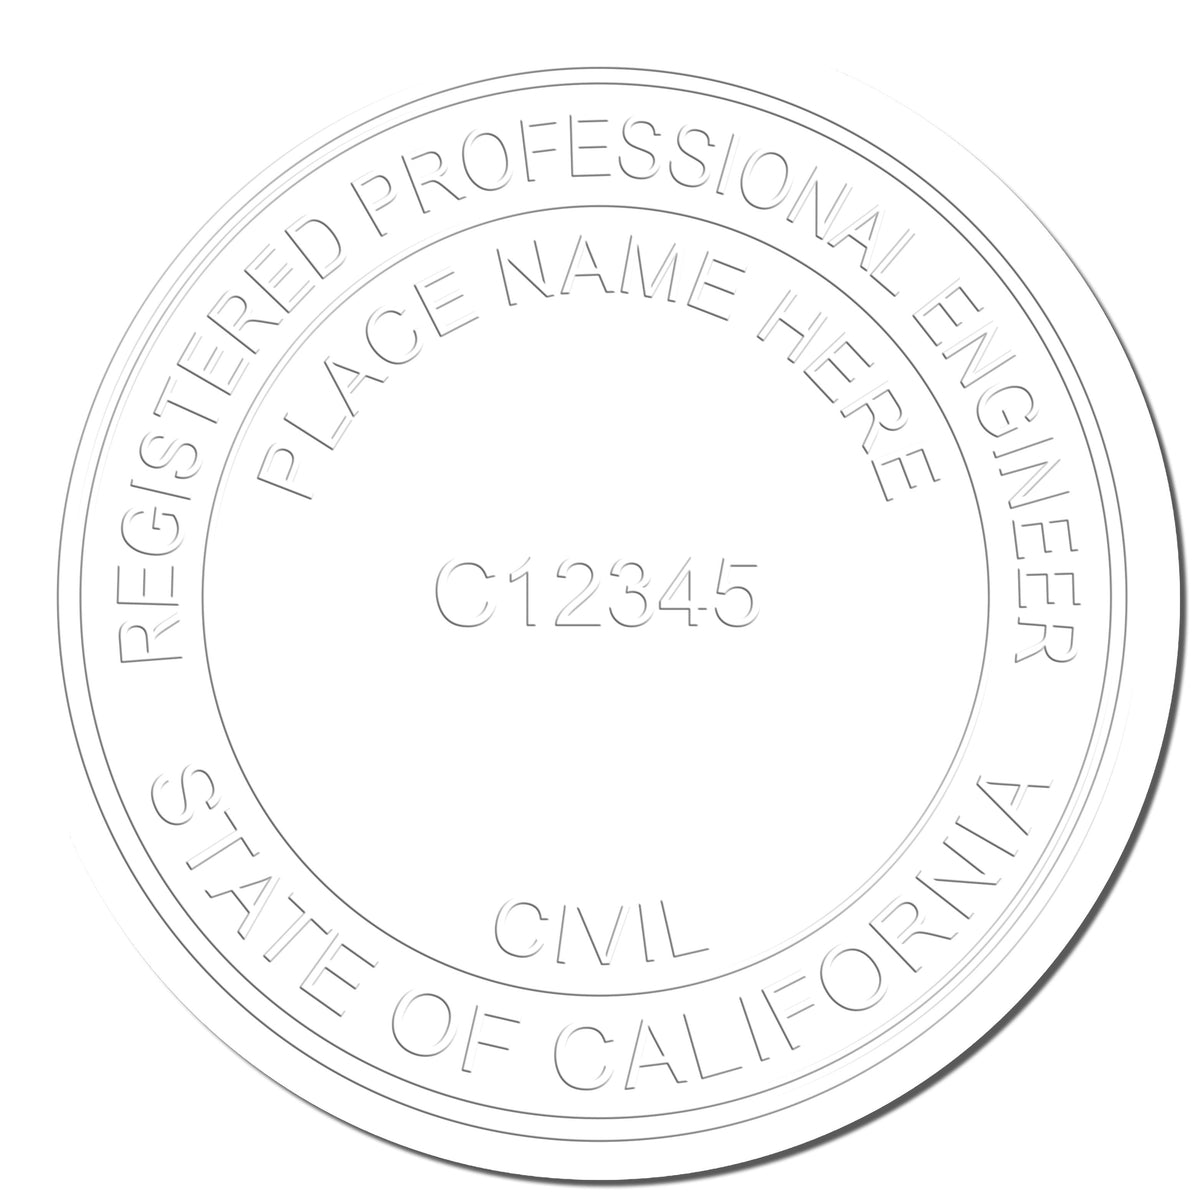 This paper is stamped with a sample imprint of the State of California Extended Long Reach Engineer Seal, signifying its quality and reliability.